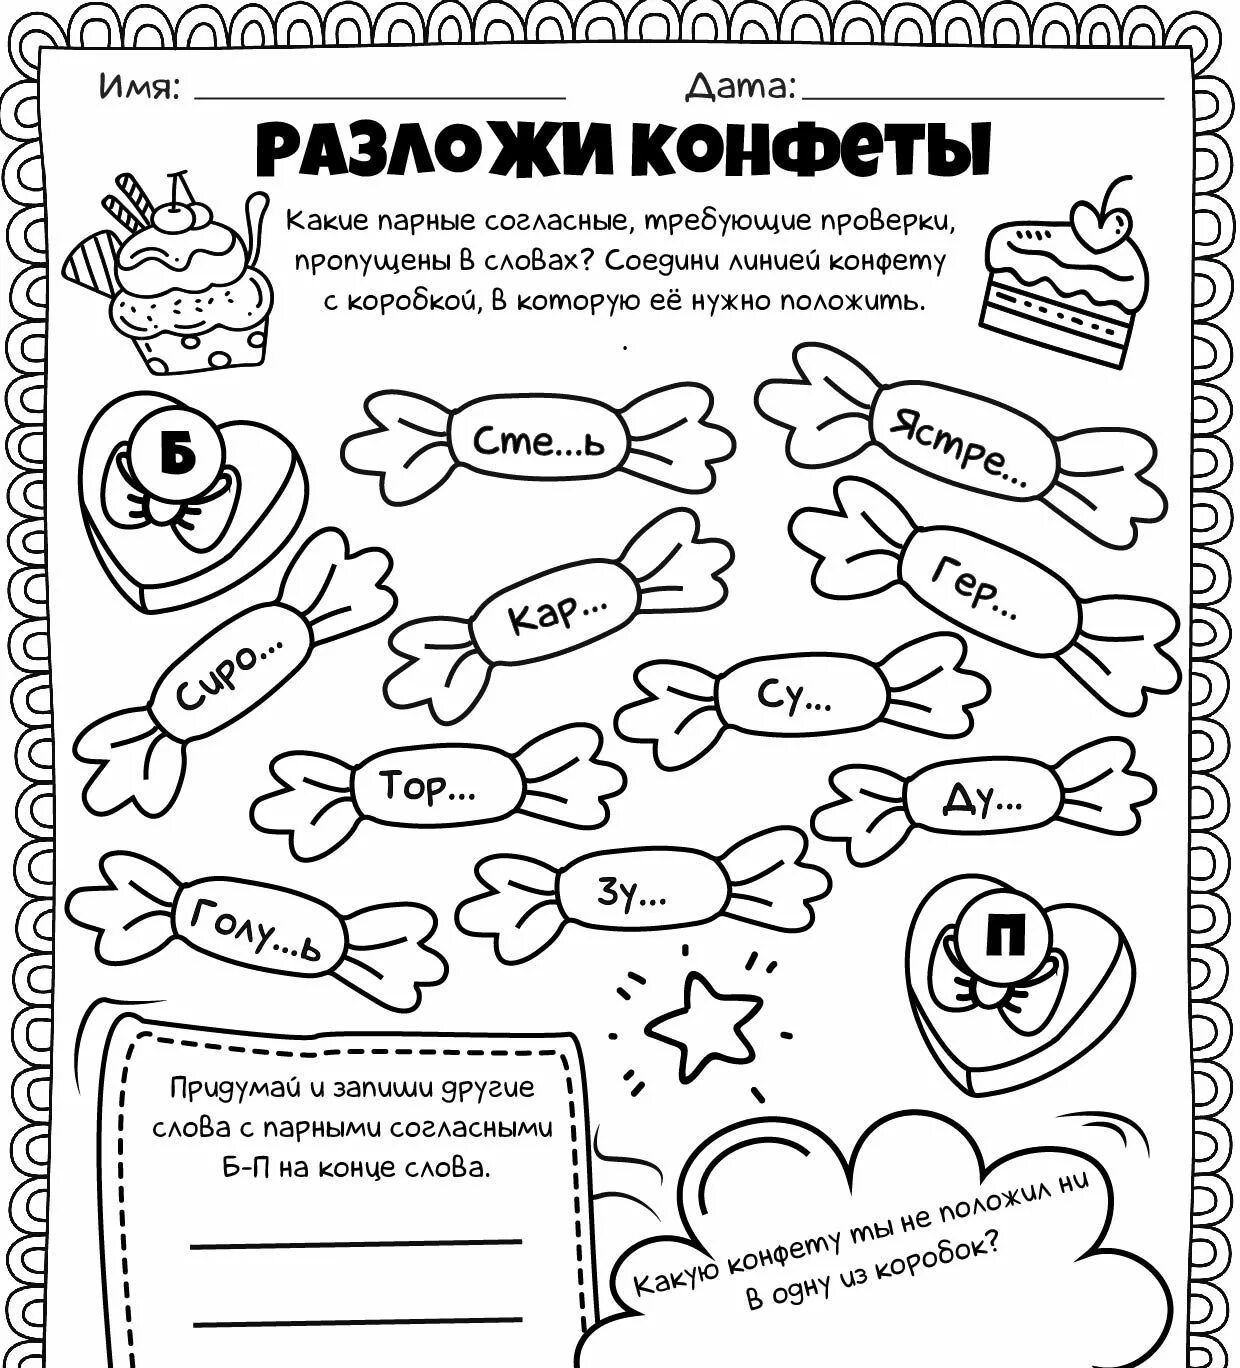 Color coloring of paired consonants in Russian for grade 2